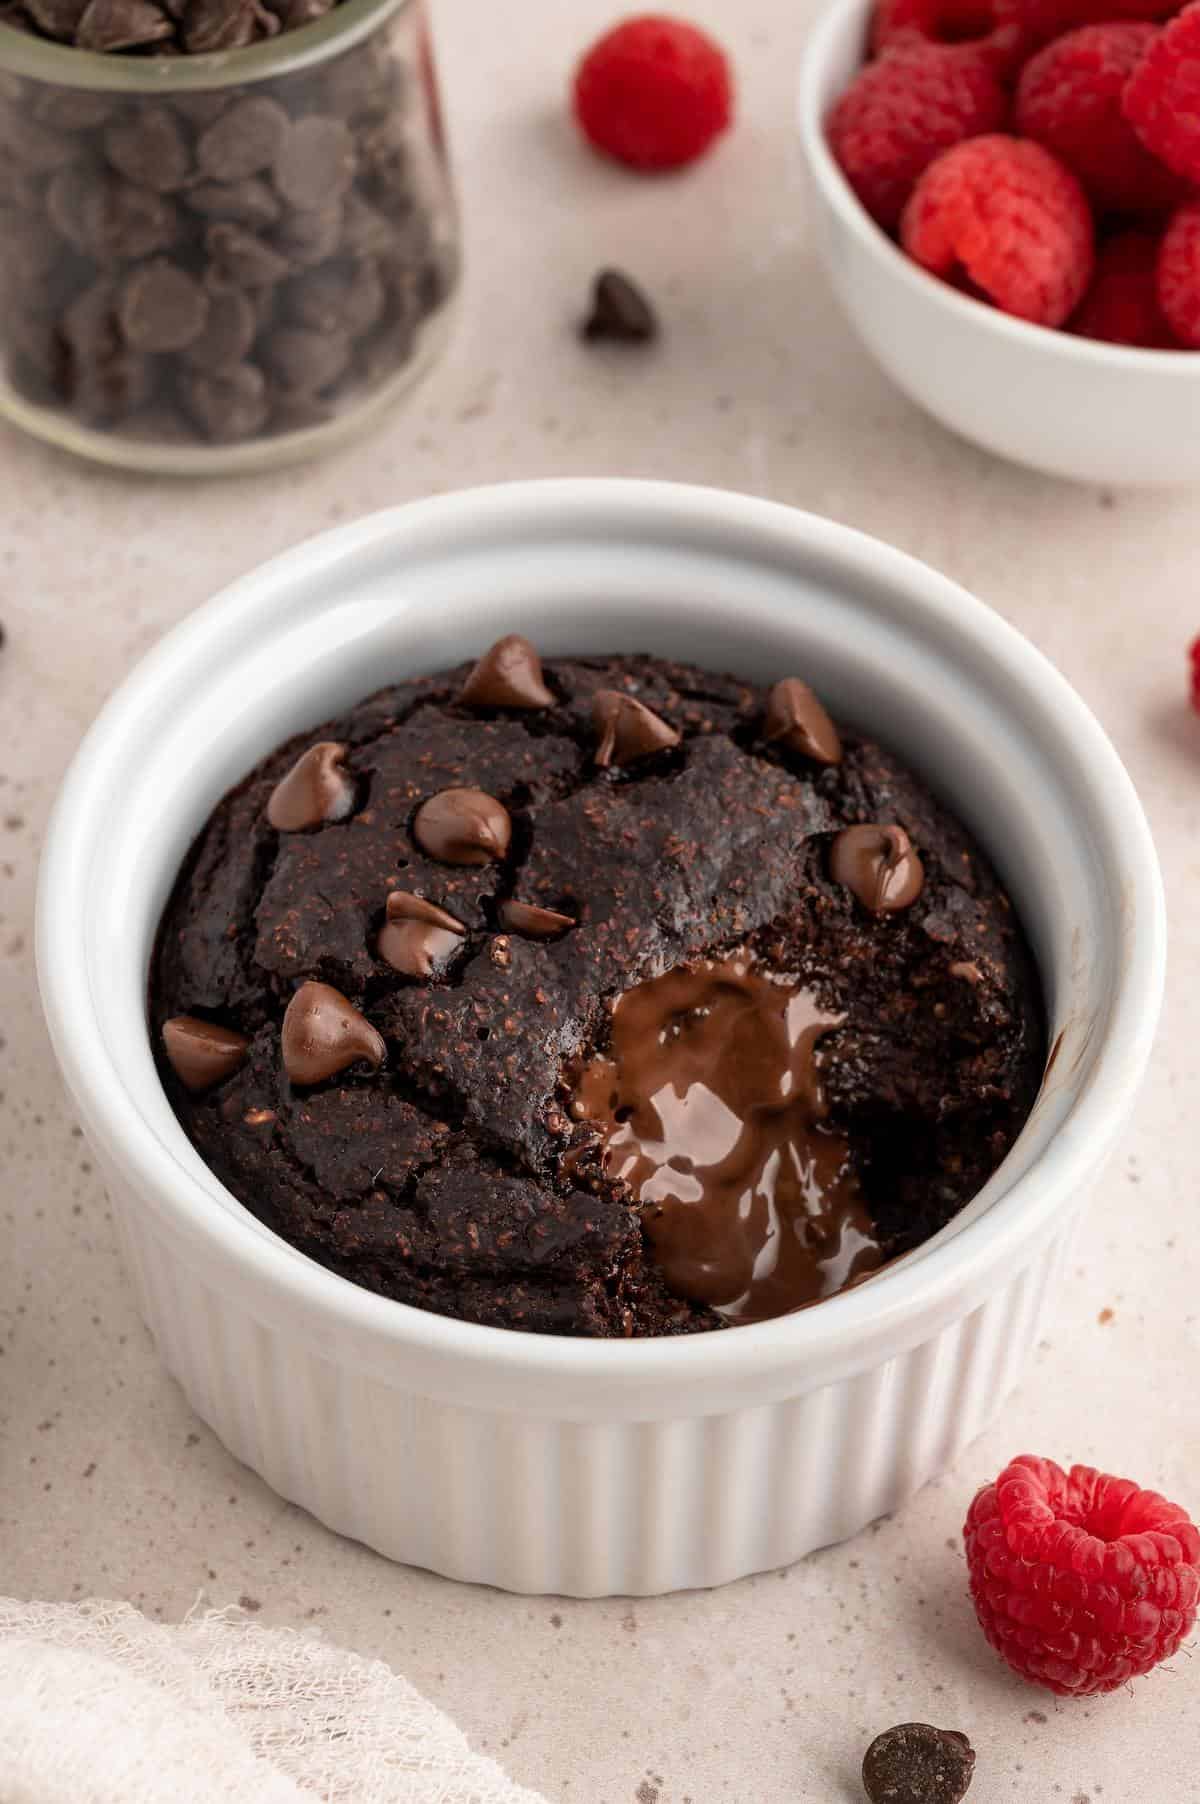 Chocolate baked oats protein mug cake with a bite missing and melted chocolate revealed.